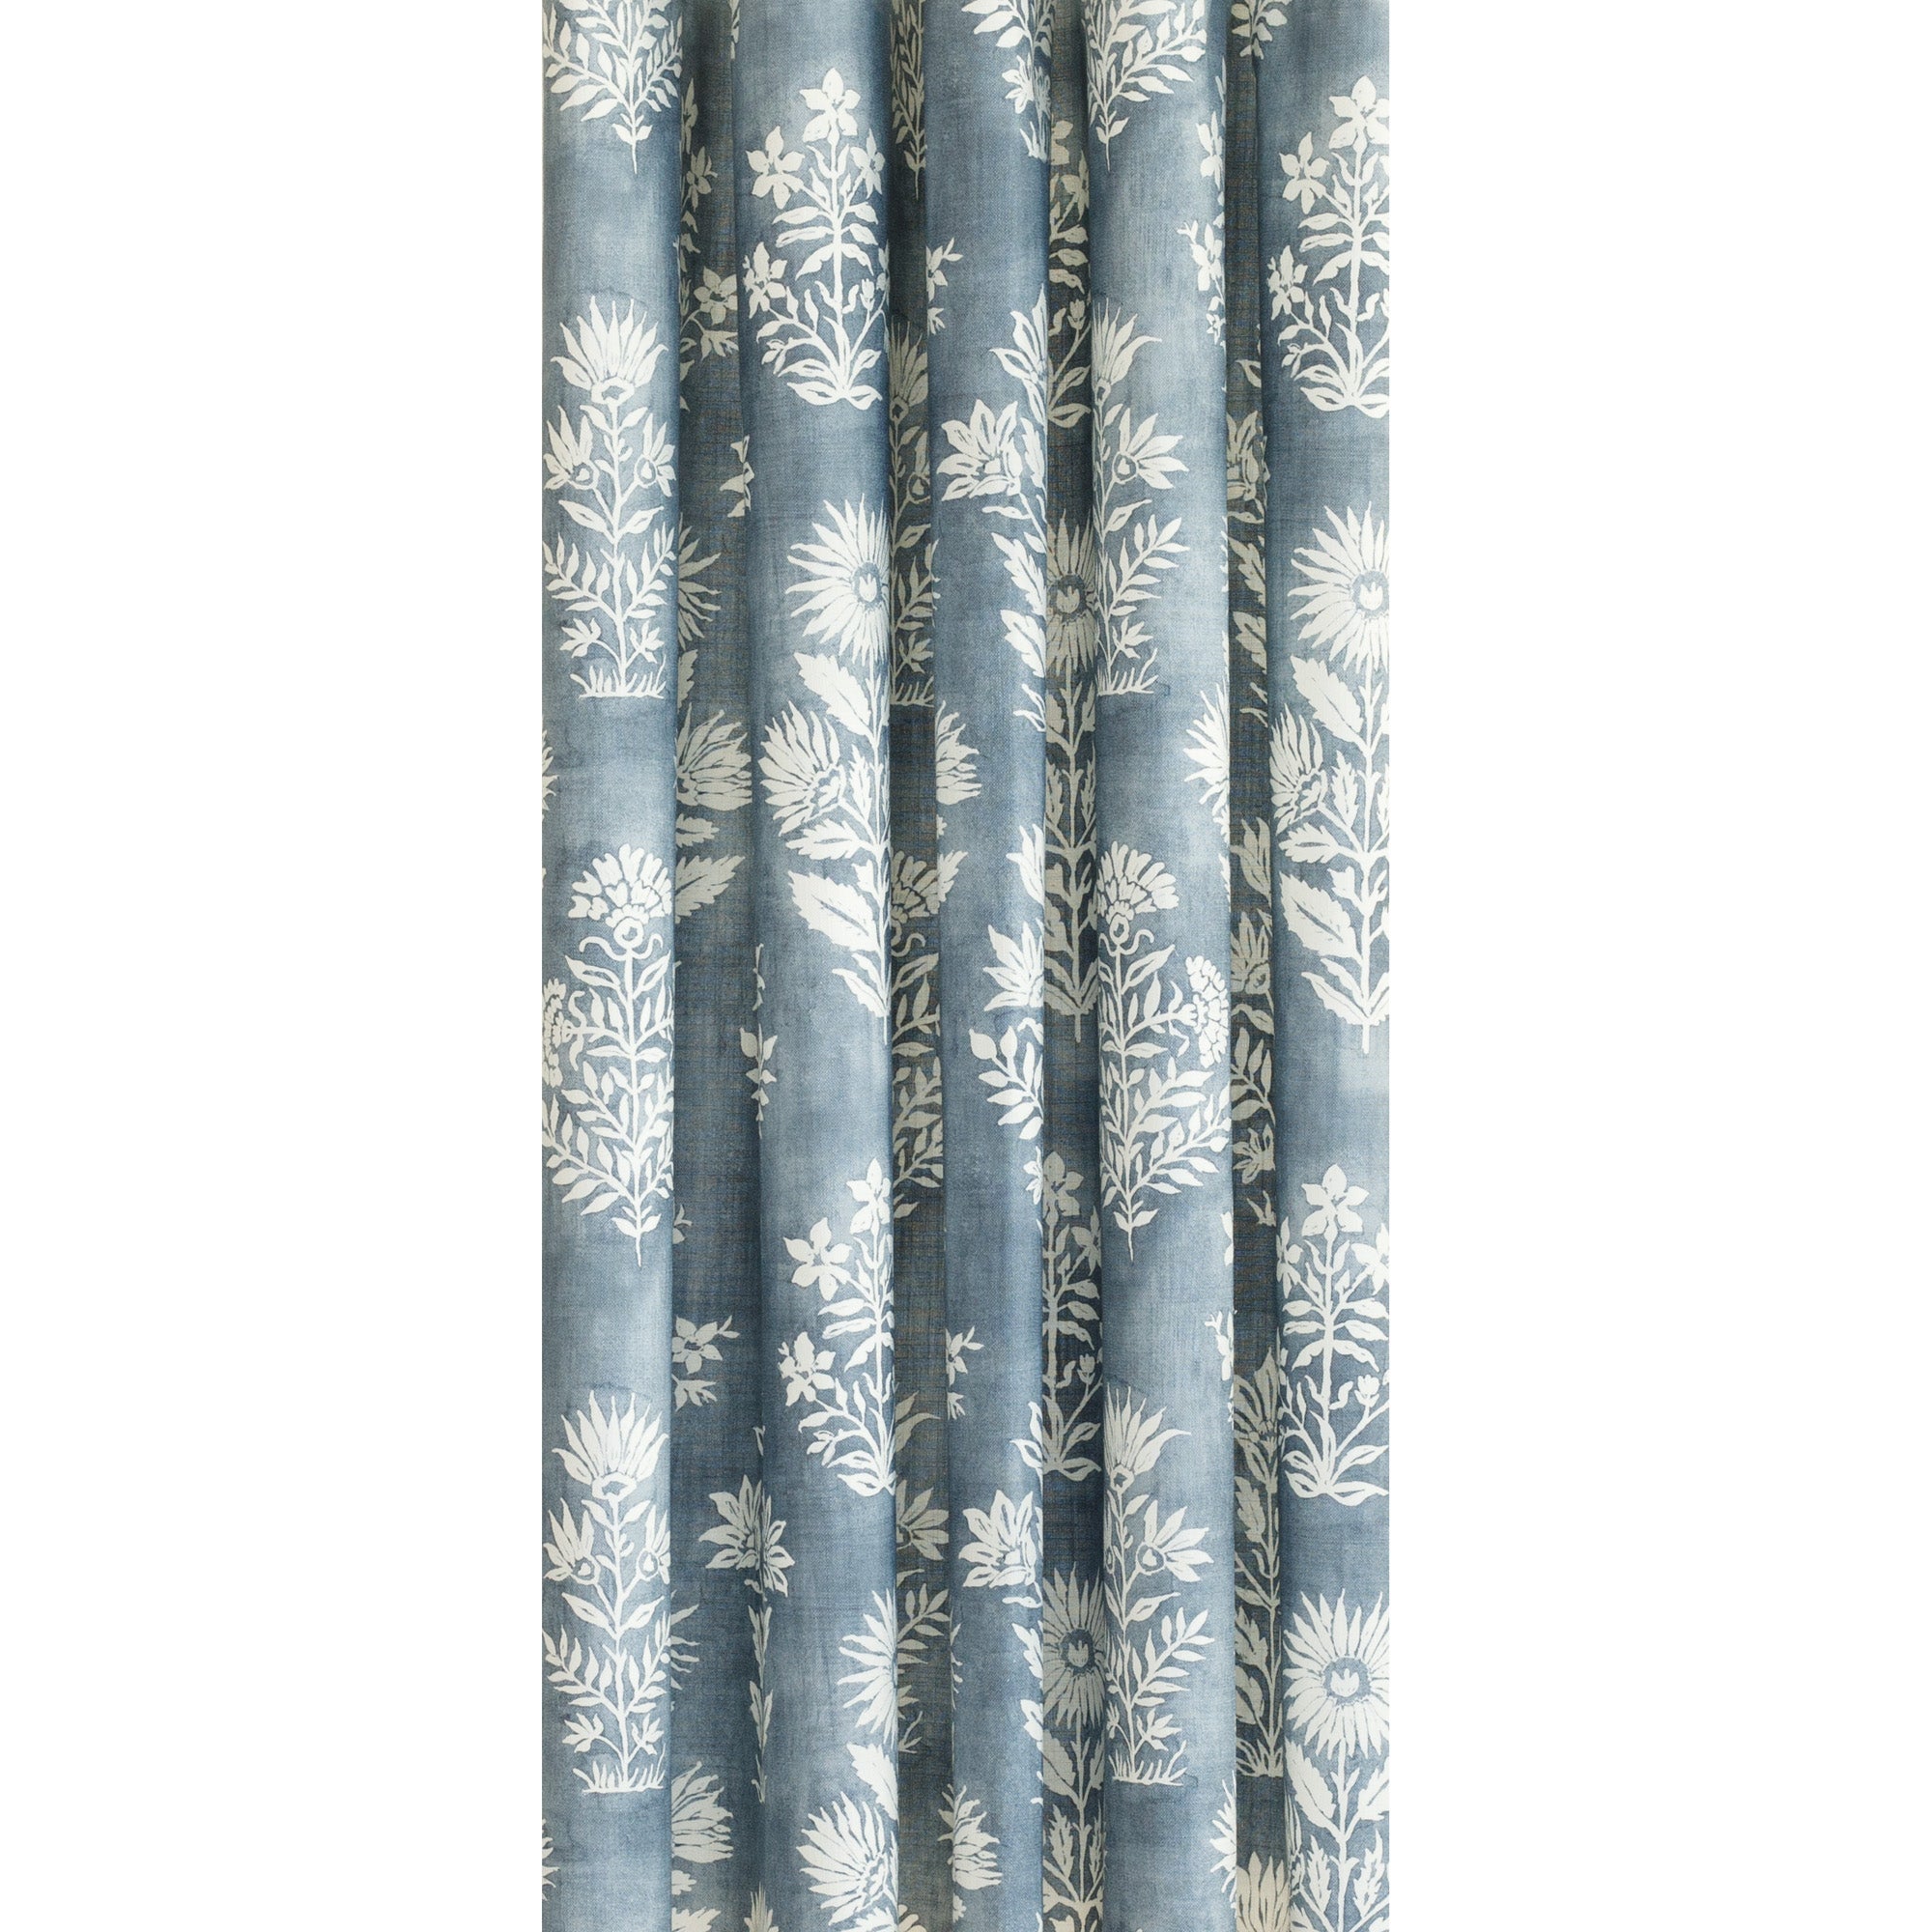 a blue and white batik inspired large scaled floral print curtain fabric